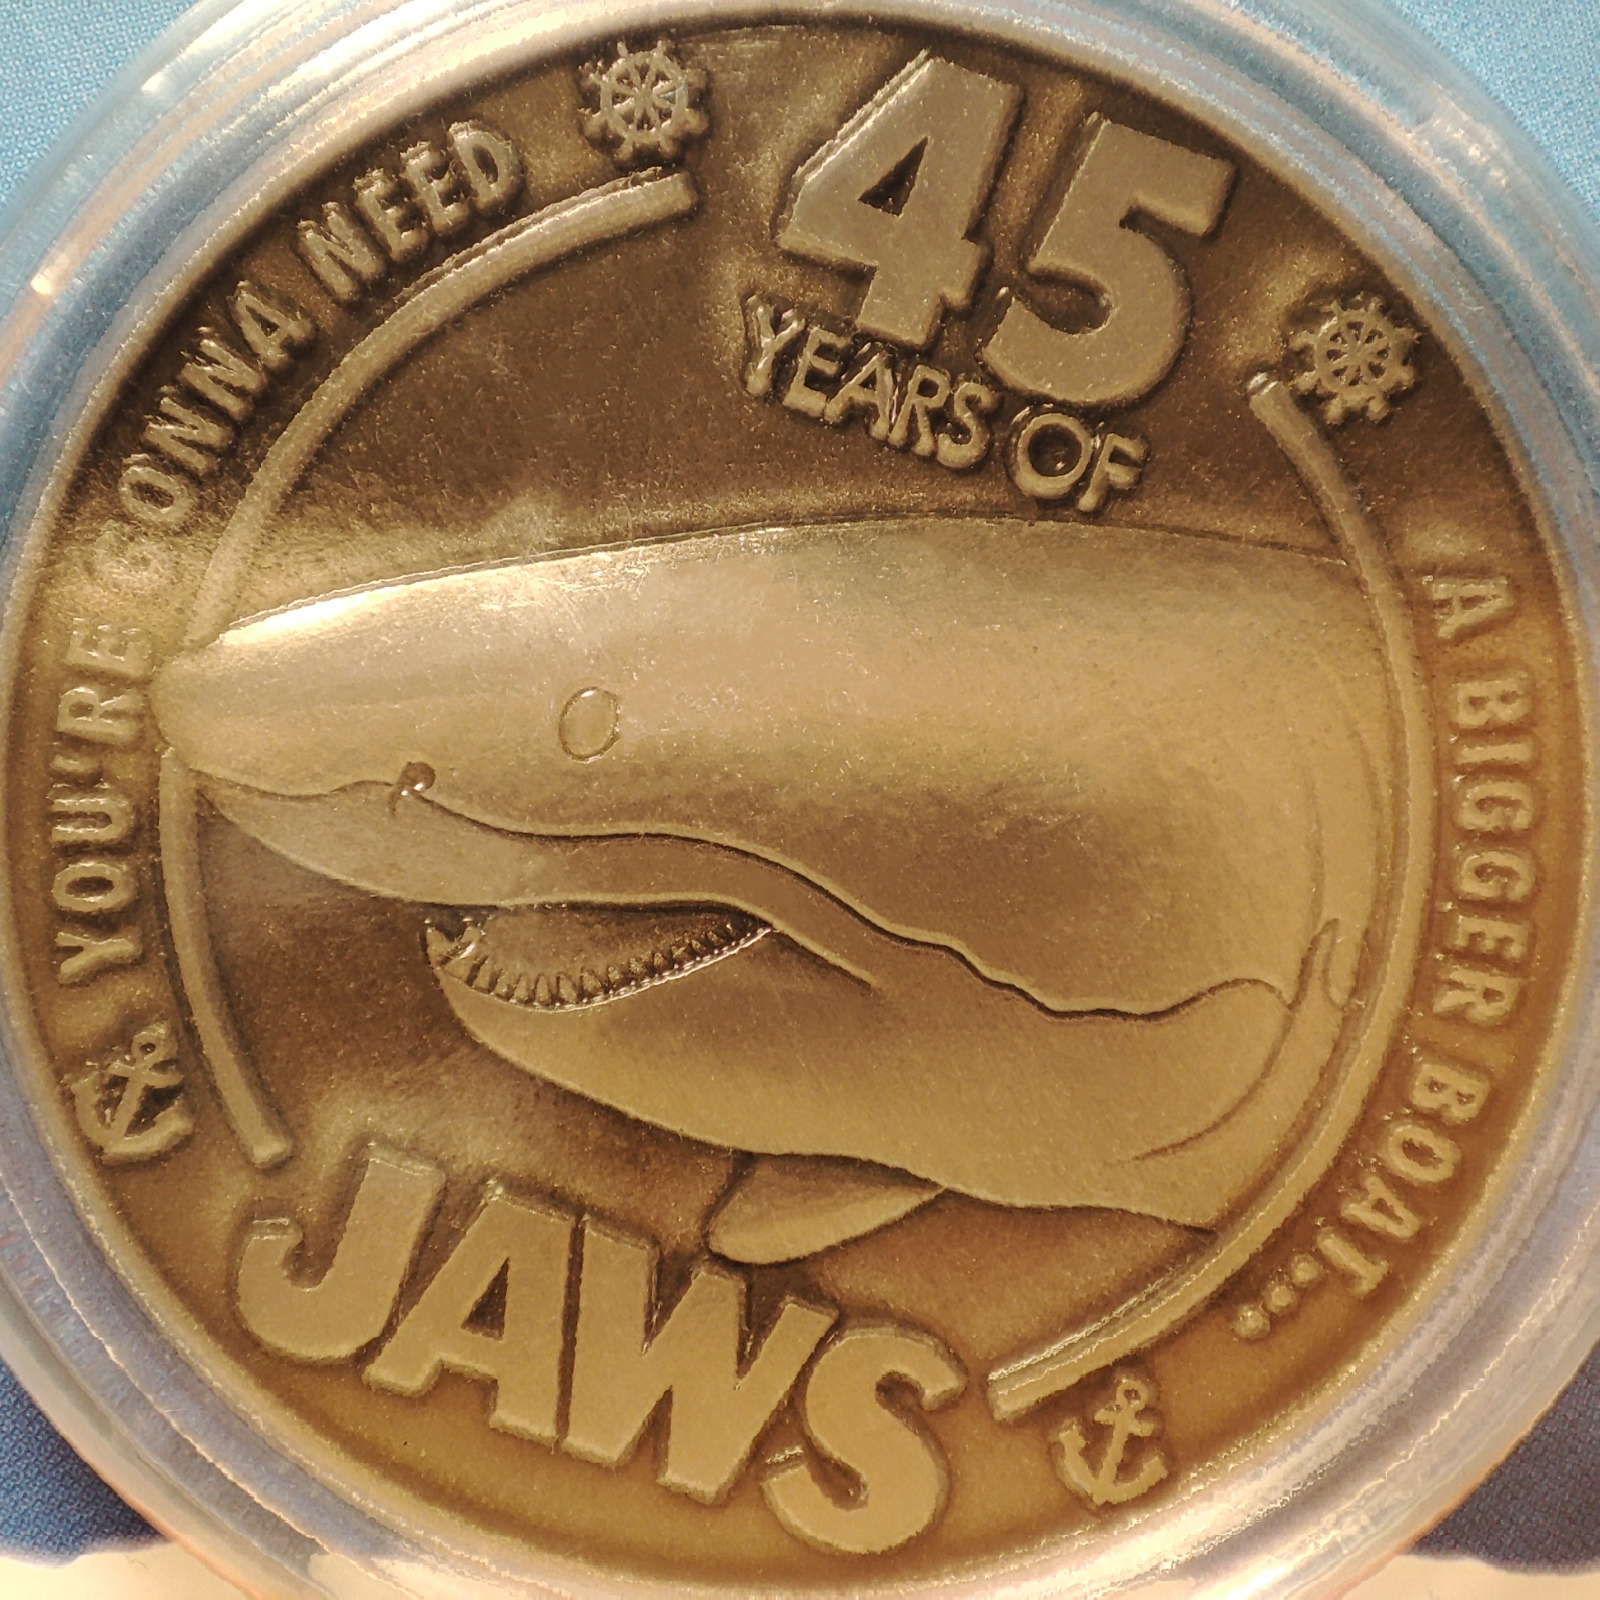 Jaws 45th Anniversary Limited Edition Metal Coin Official Movie Collectible